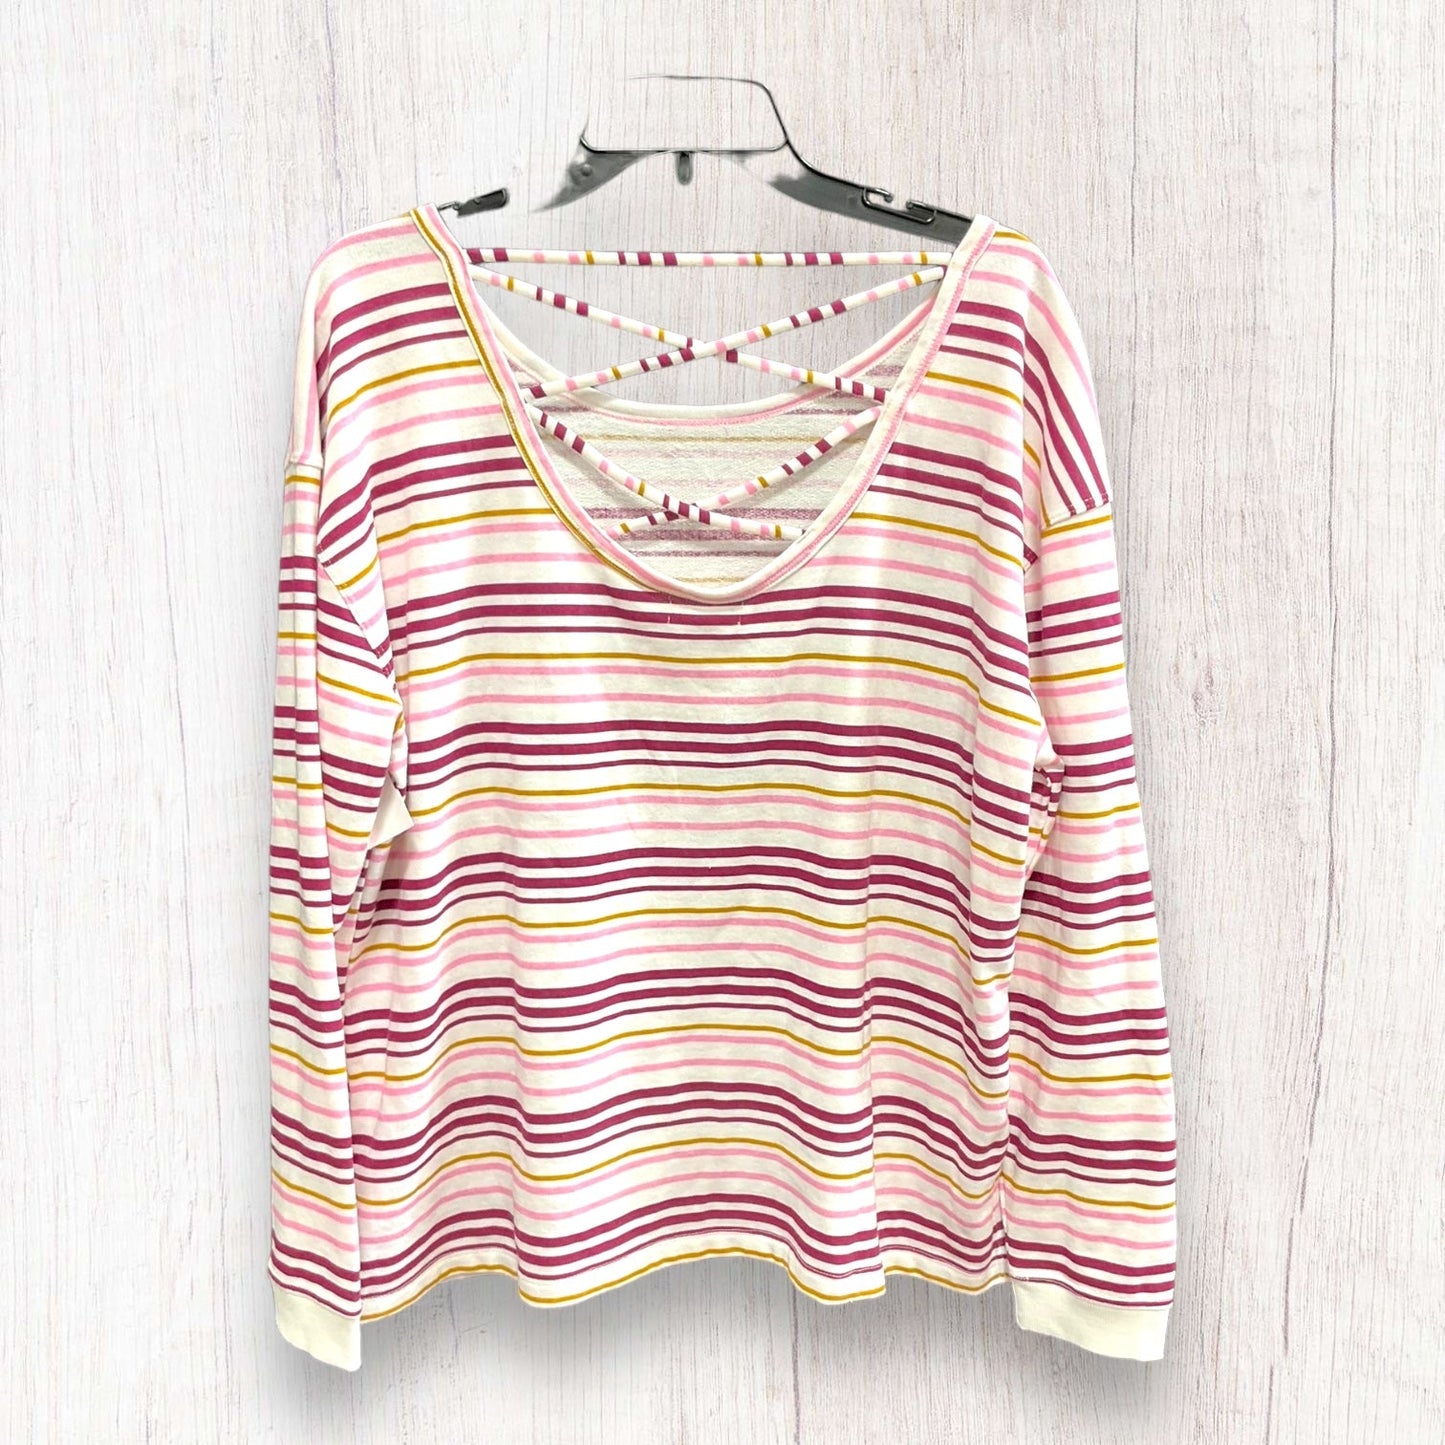 Striped Pattern Top Long Sleeve Basic Maurices, Size L